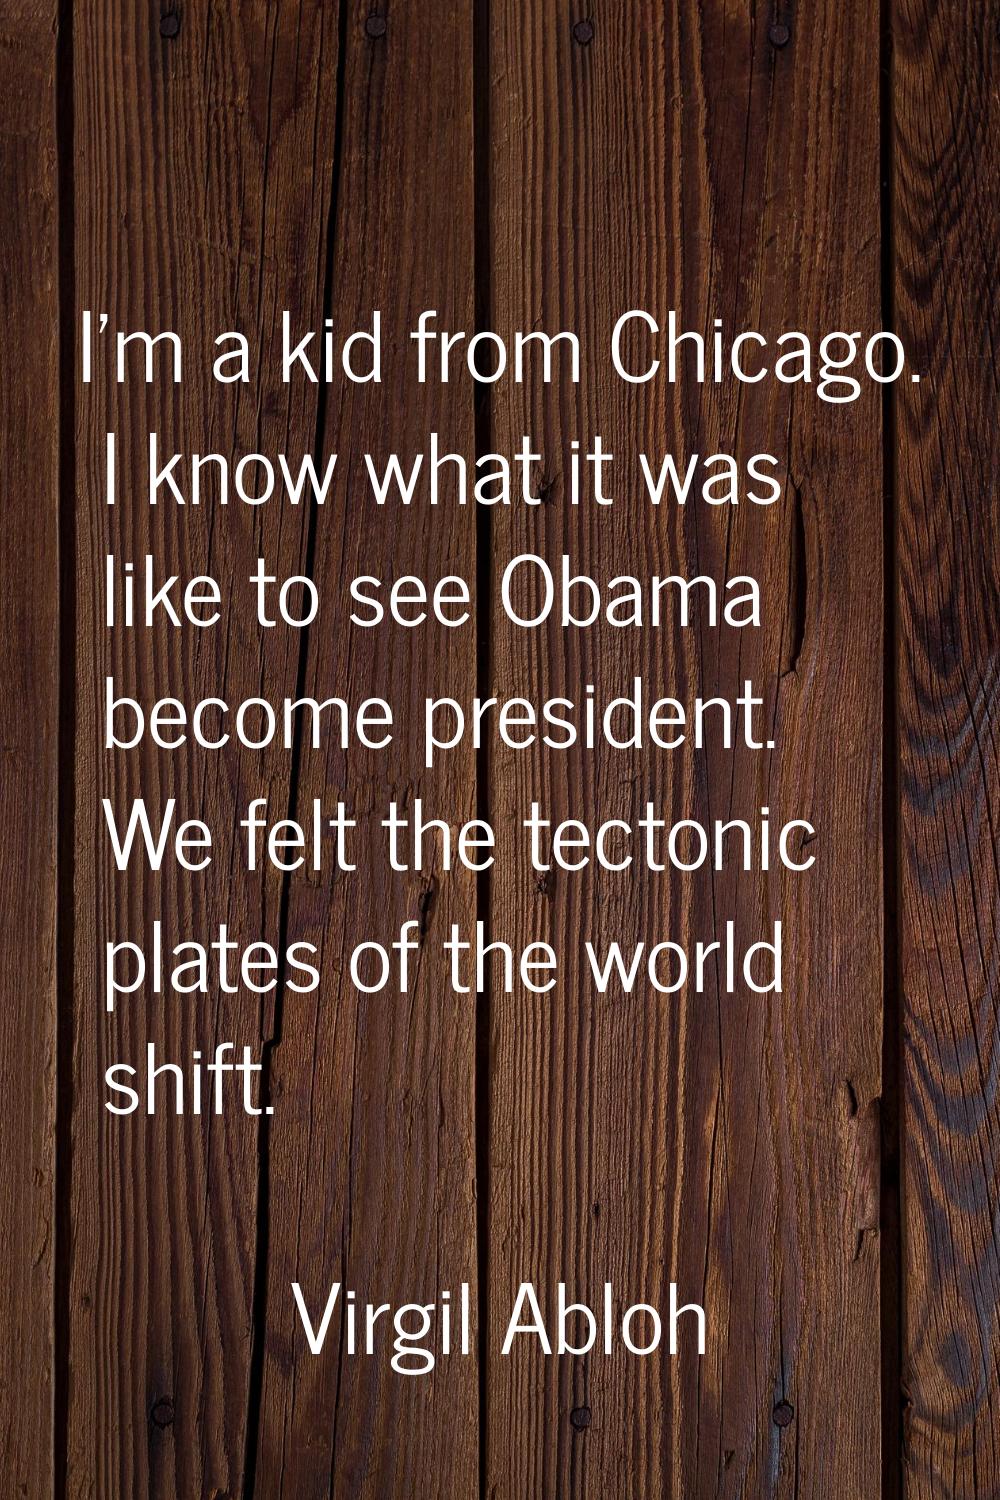 I'm a kid from Chicago. I know what it was like to see Obama become president. We felt the tectonic